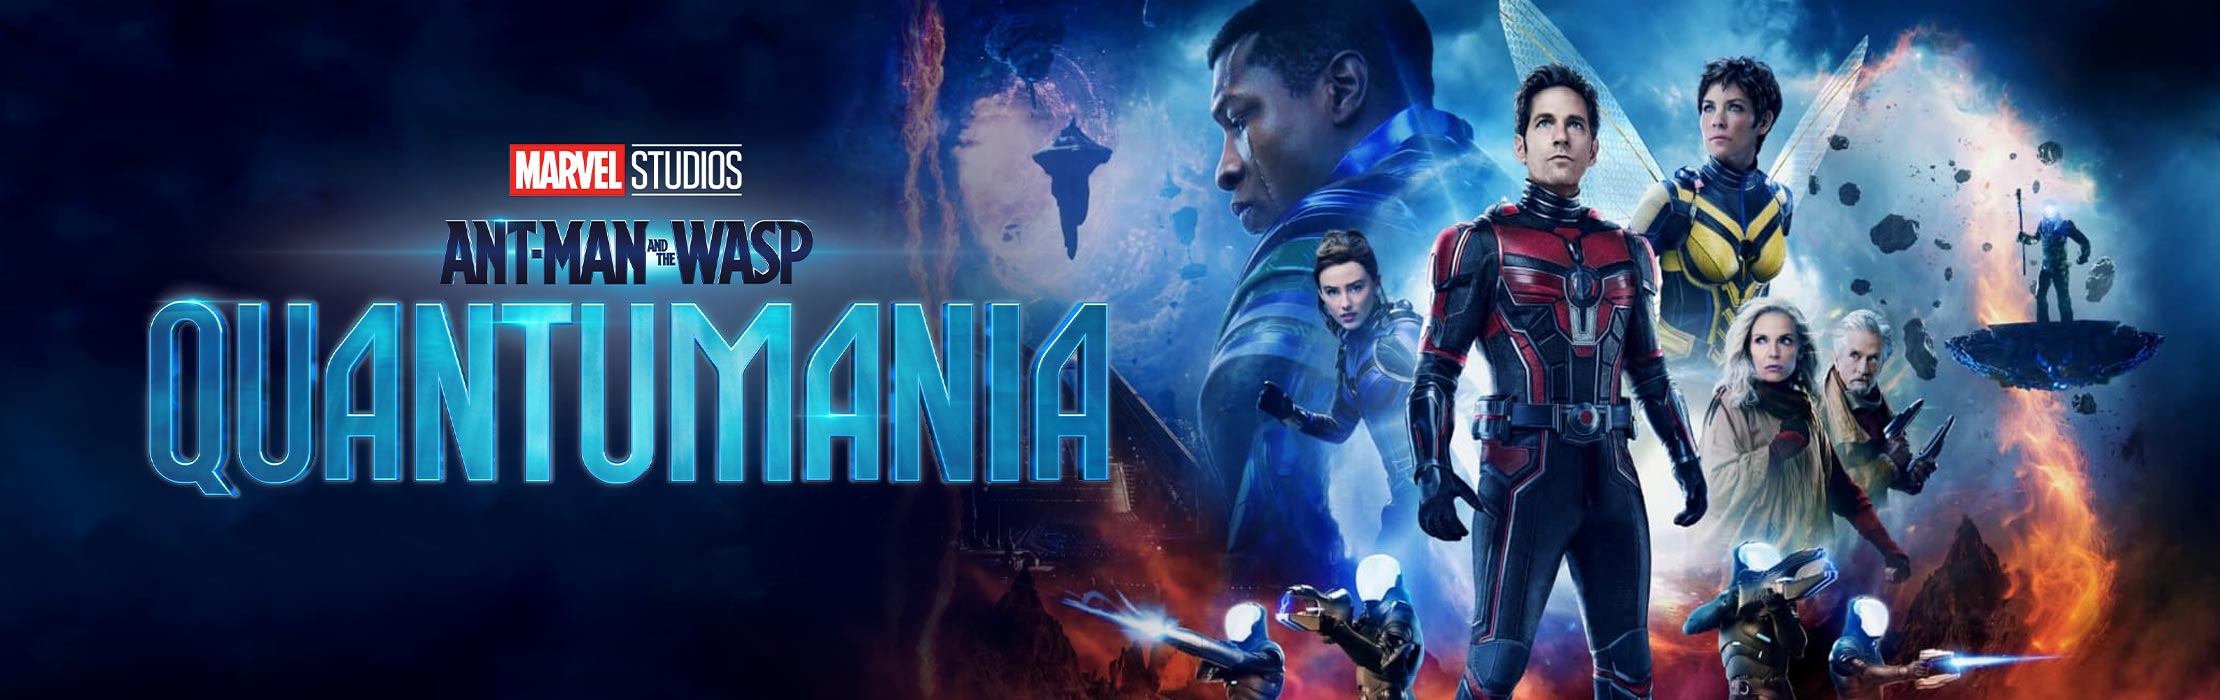 Antman and the Wasp: Quantumania